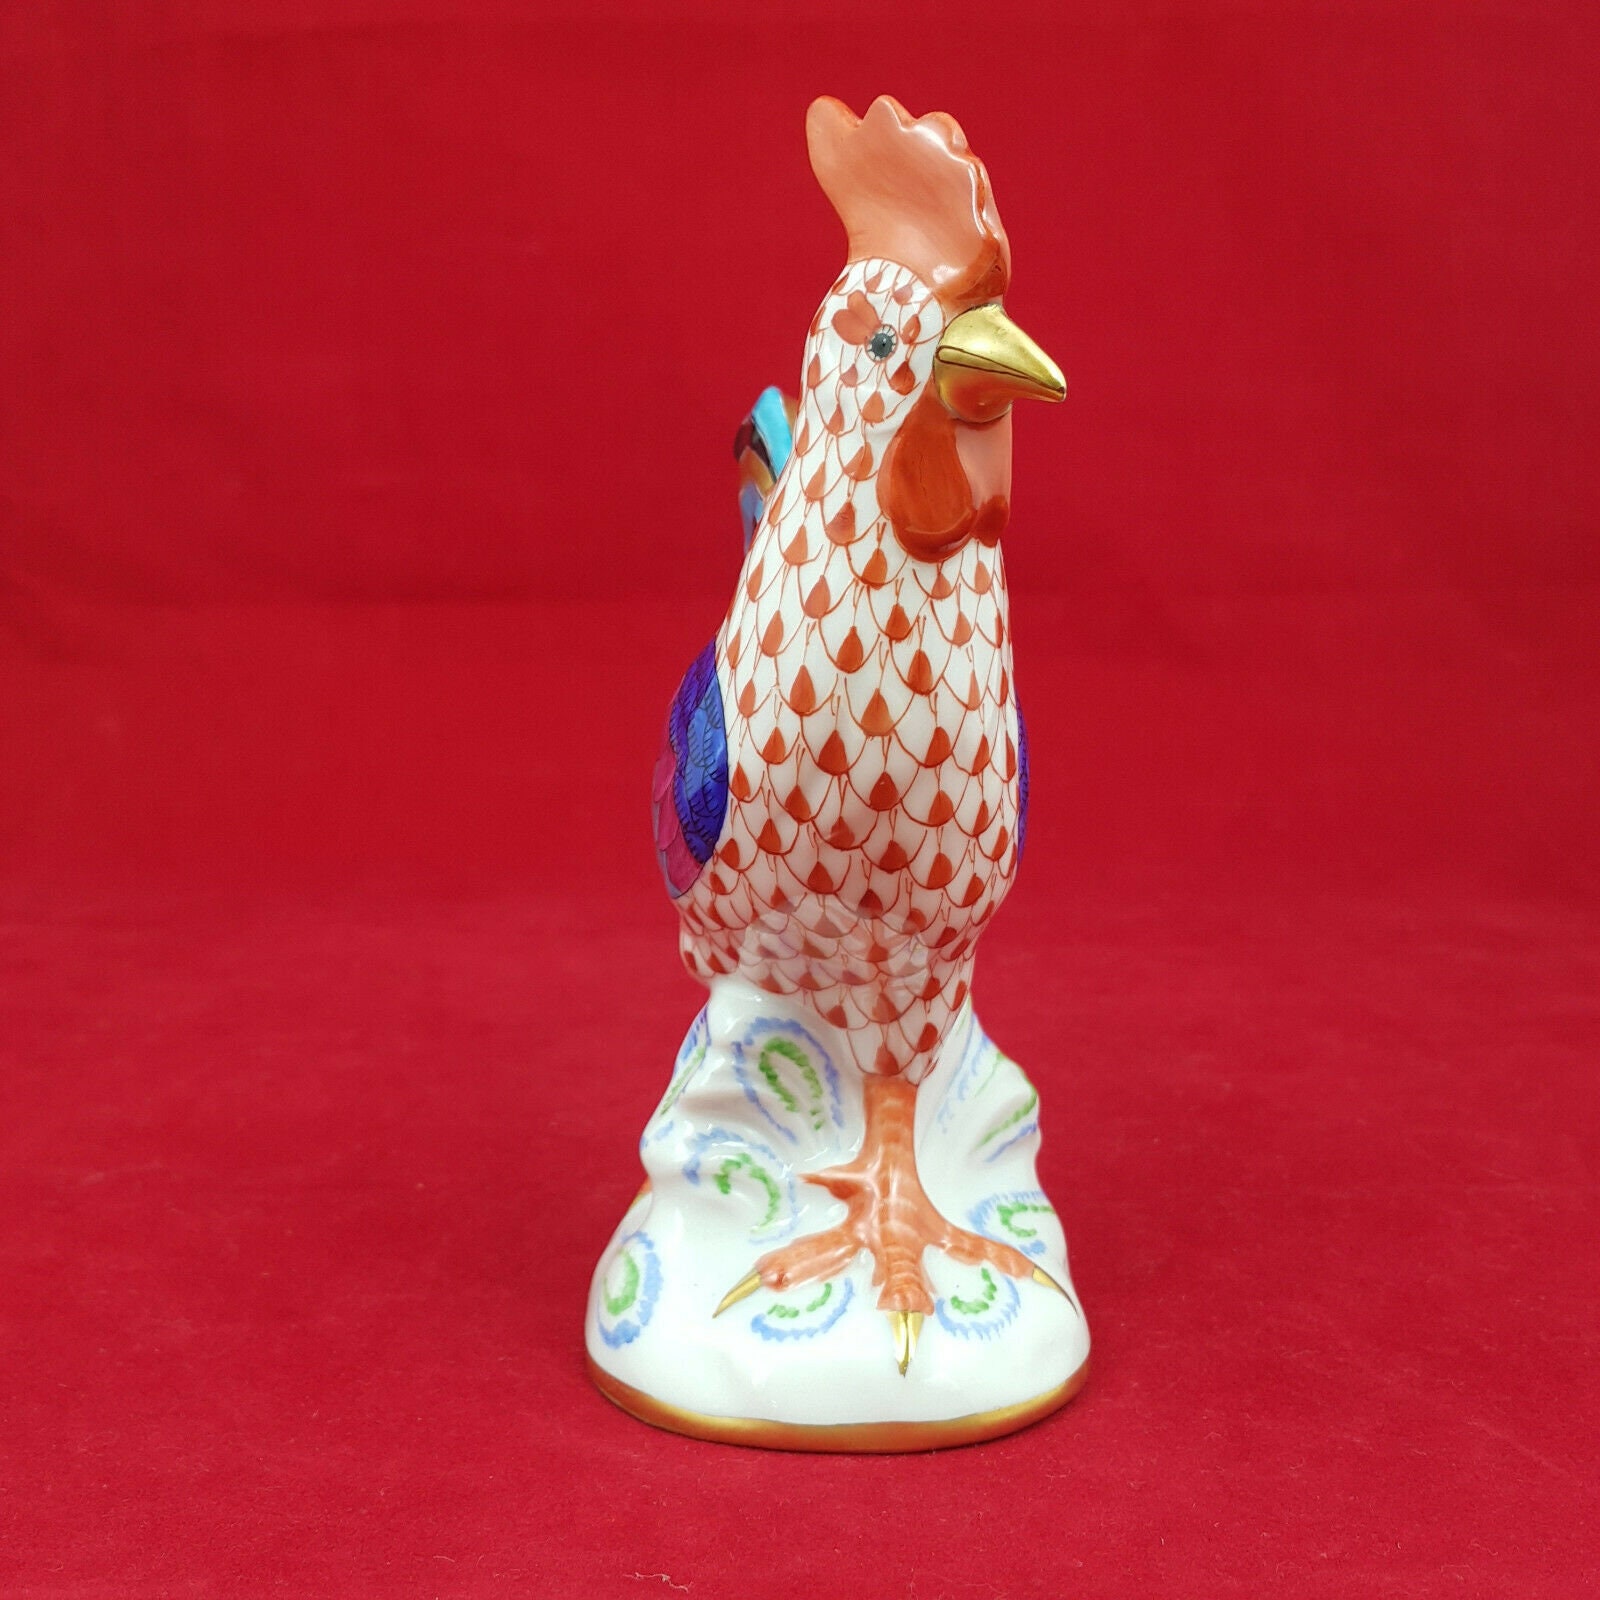 Herend Porcelain Rooster Figurine With Fishnet Pattern | Etsy